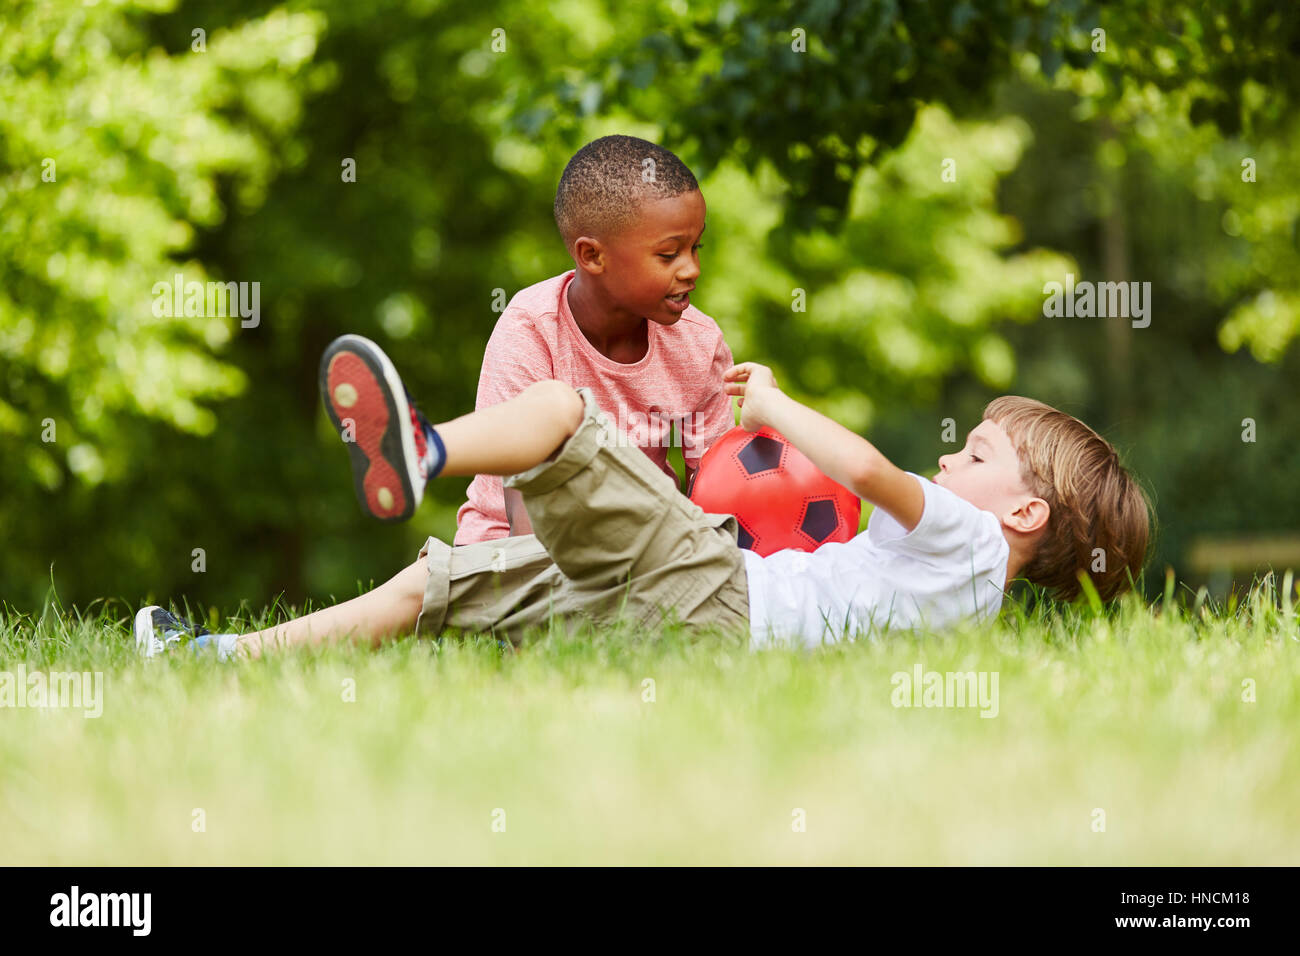 Two boys playing soccer together in the park in summer Stock Photo